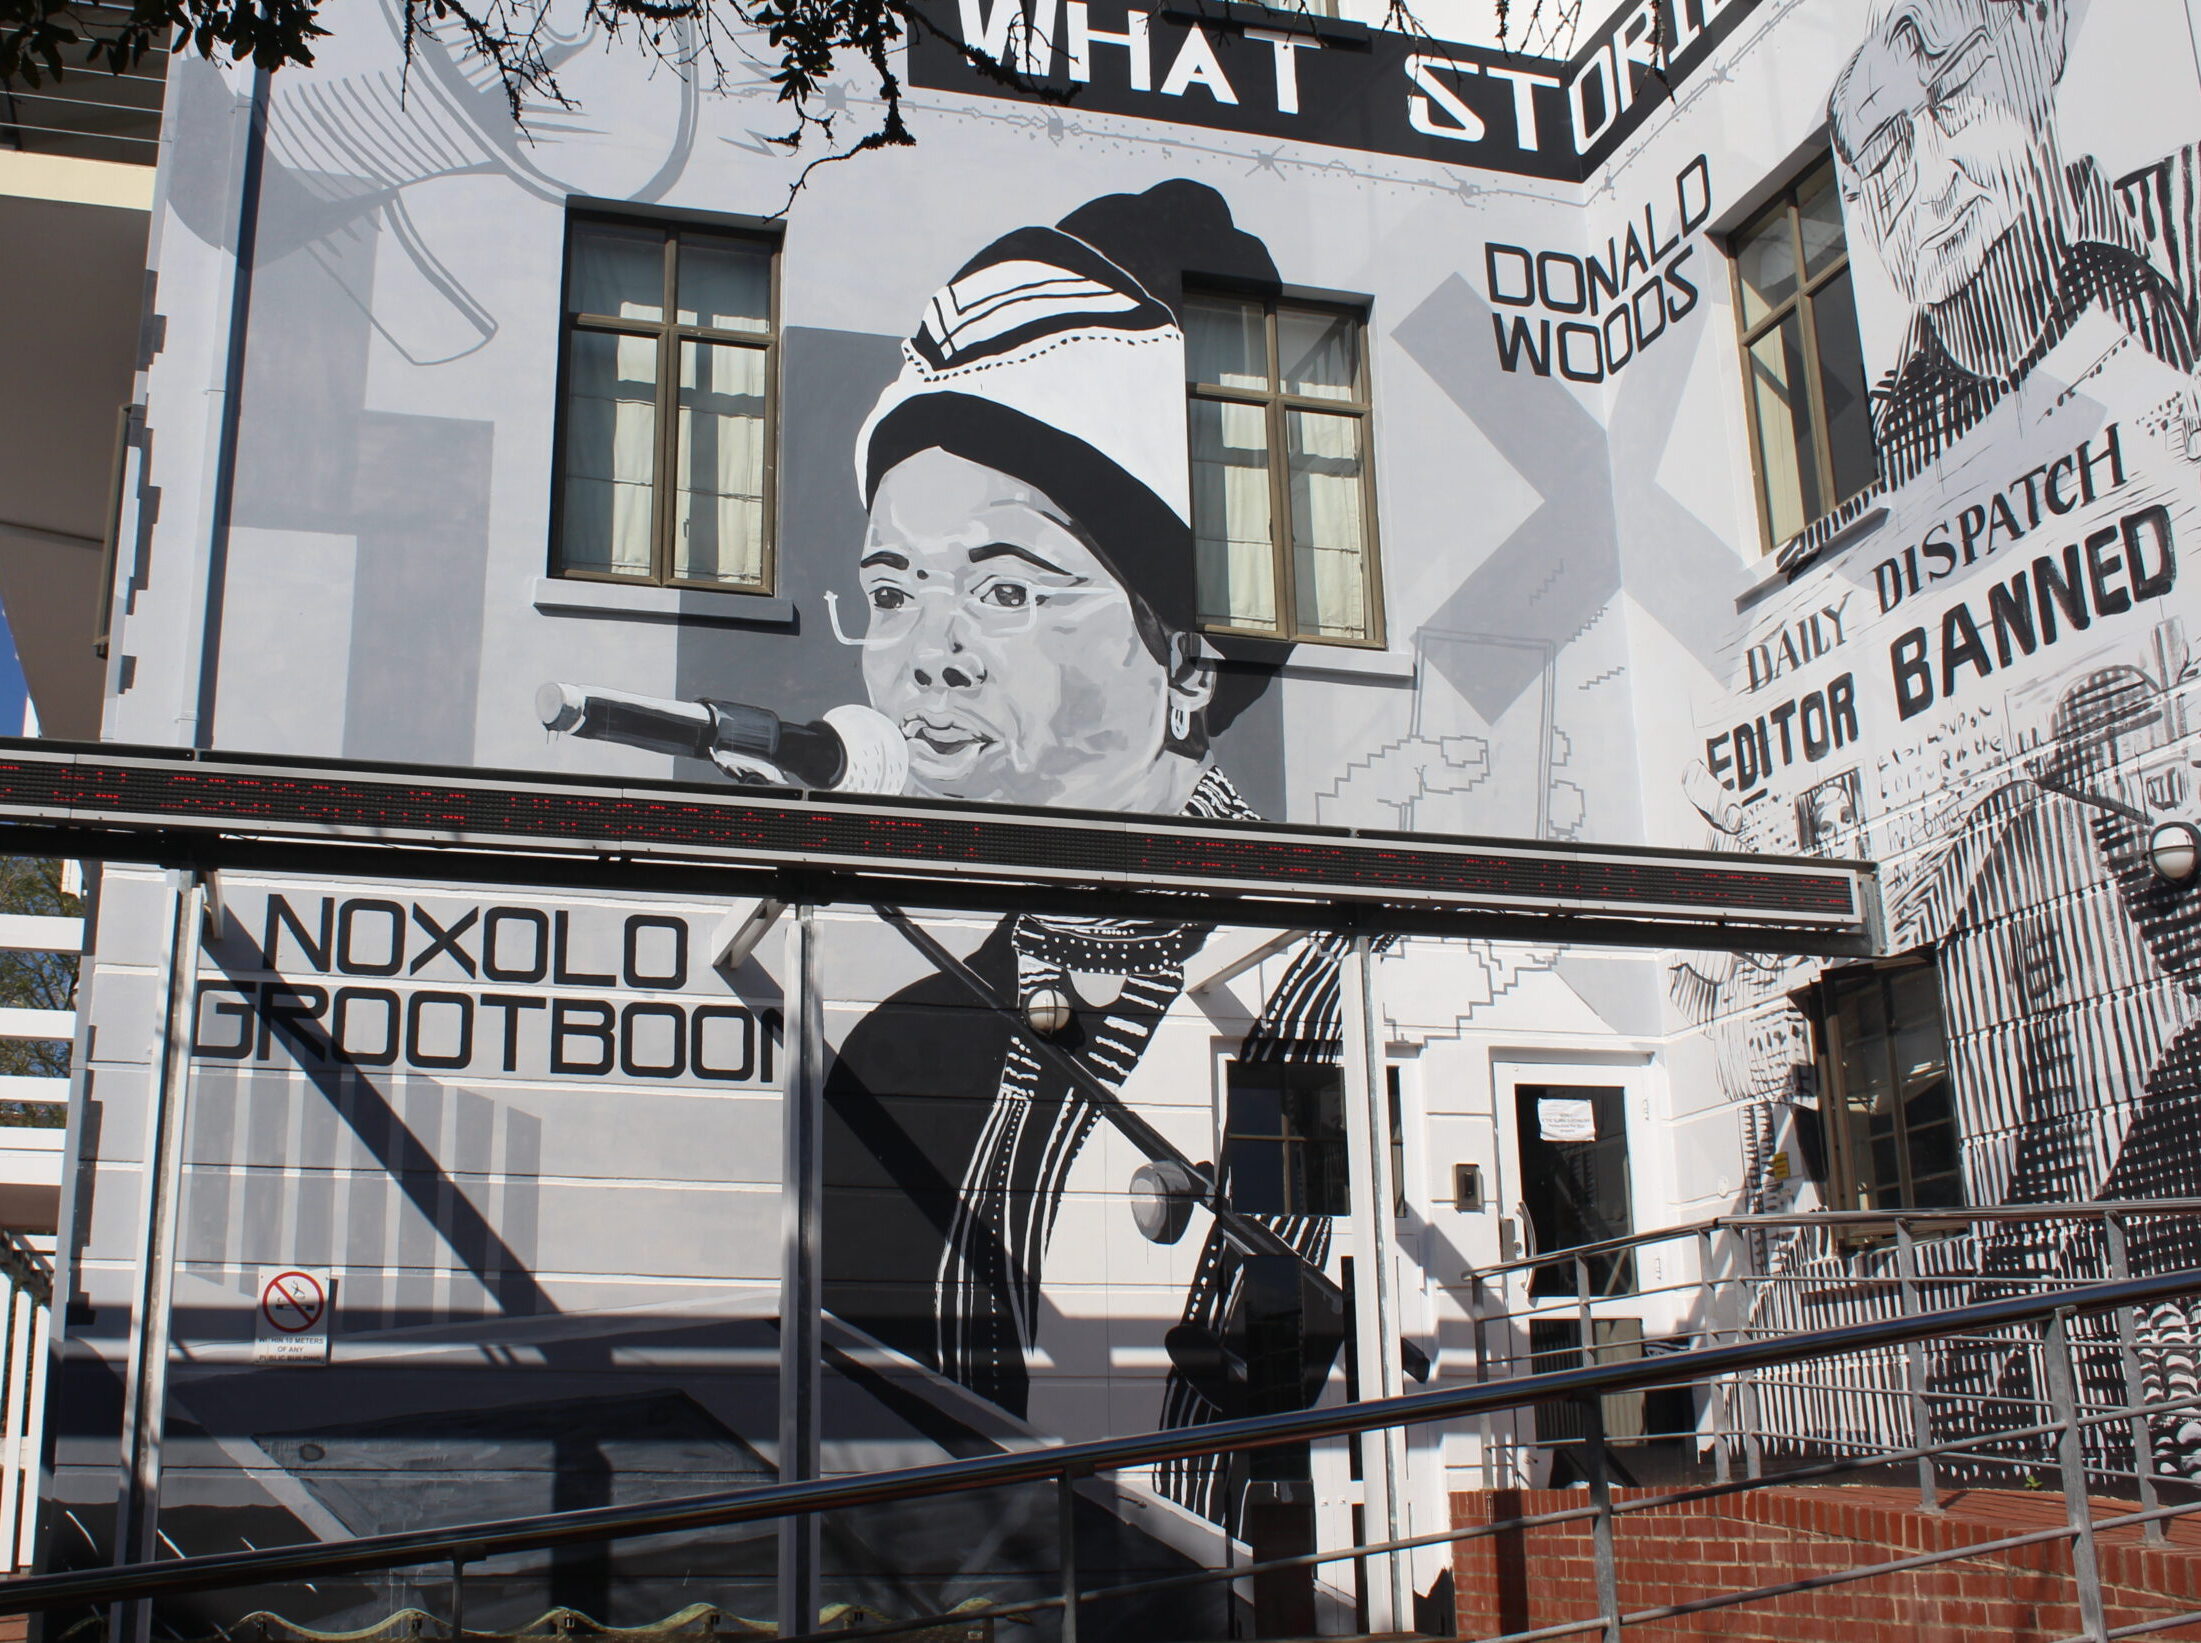 The mural of Doctor Noxolo Grootboom